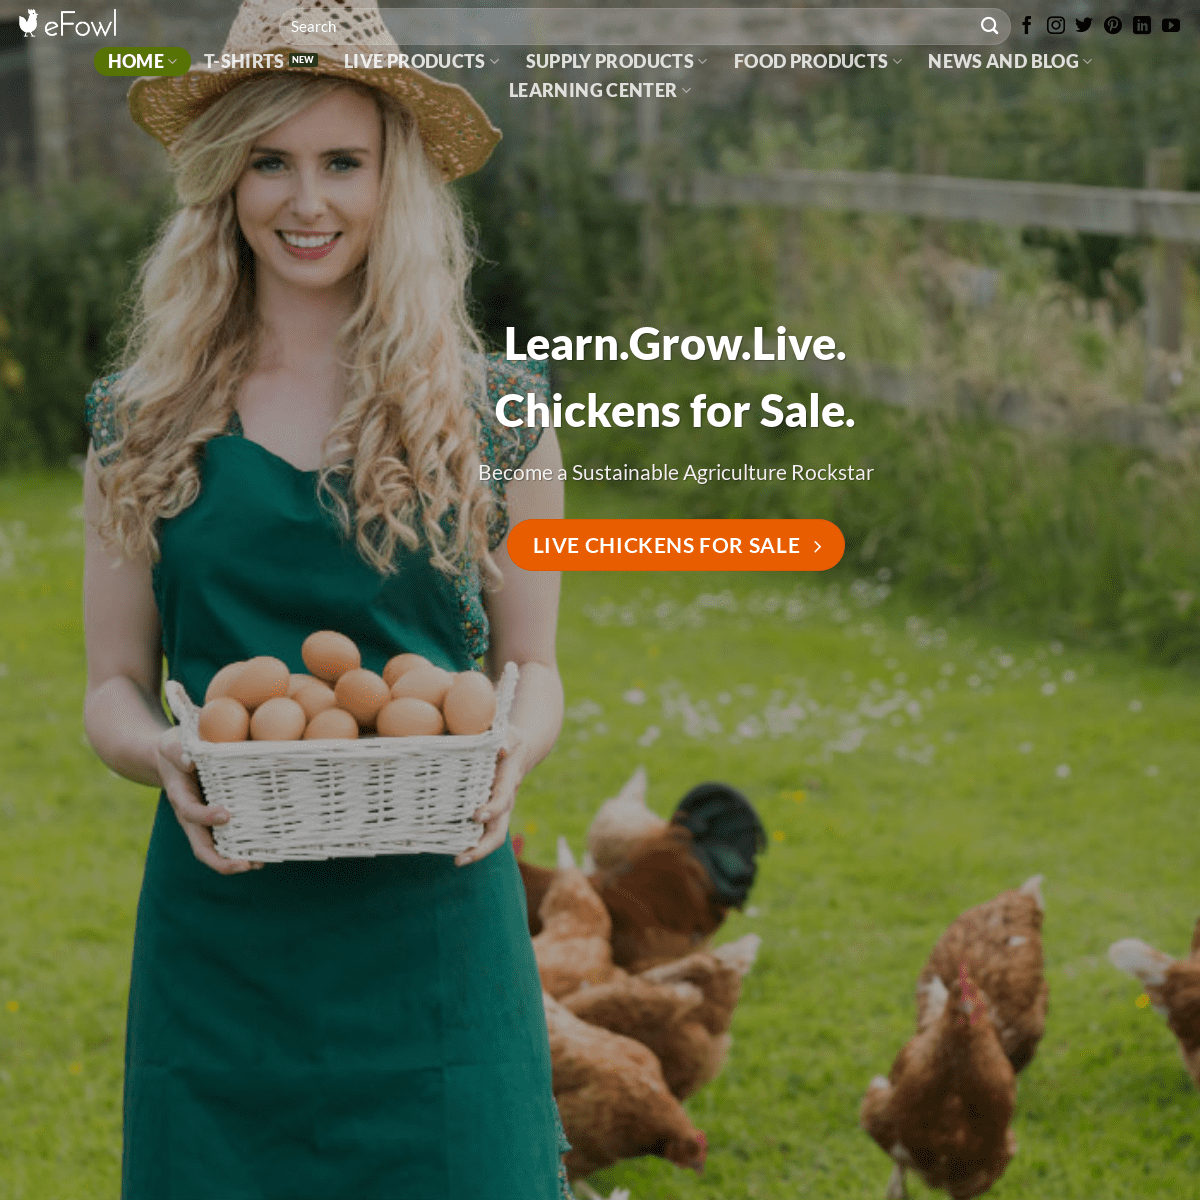 Live Chickens for Sale | Shop, Learn, and Grow Baby Chicks at eFowl